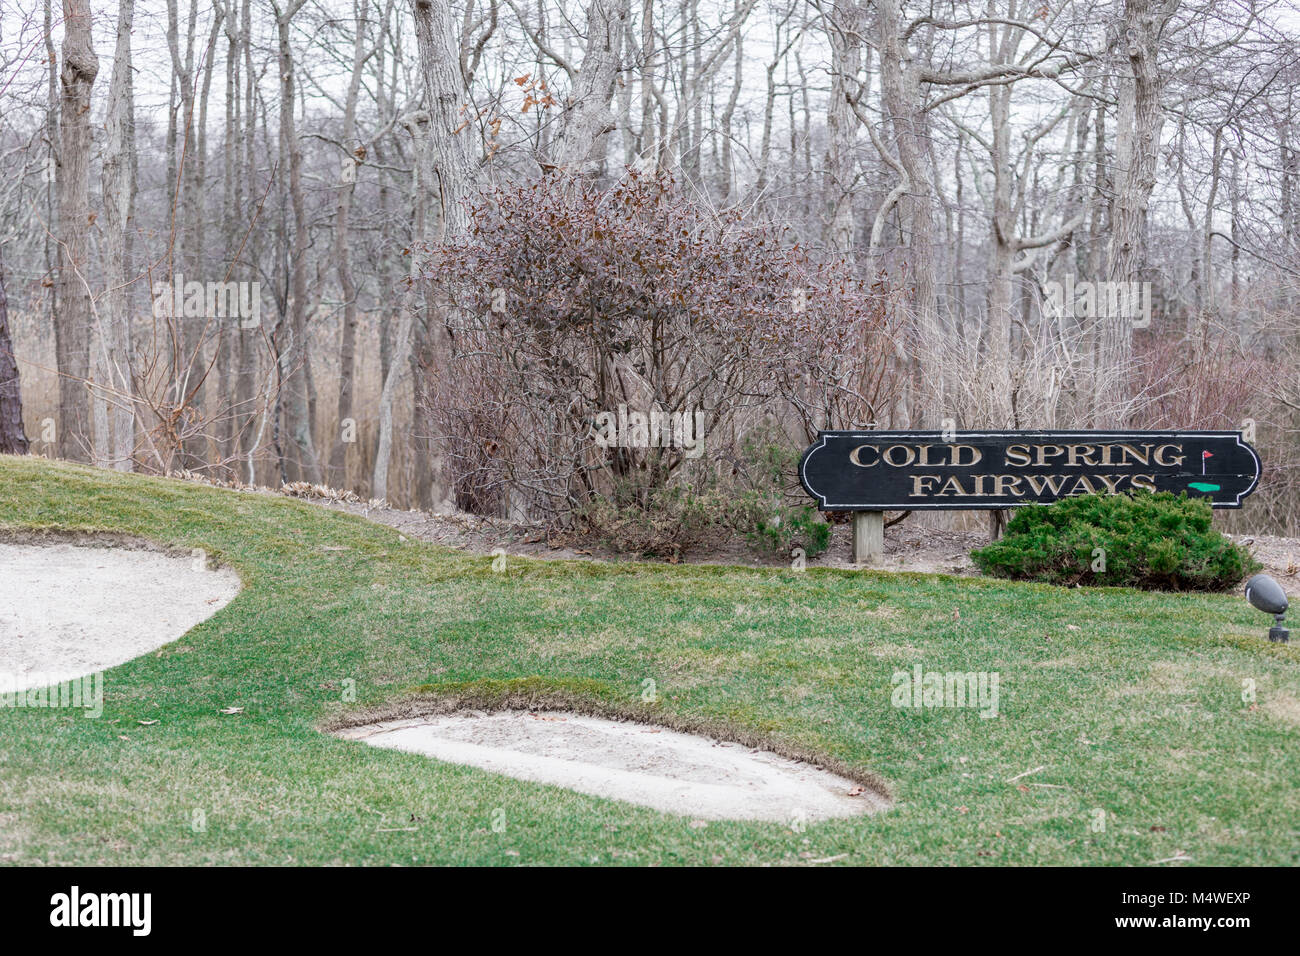 sign for a community called cold spring fairways in Southampton, ny Stock Photo